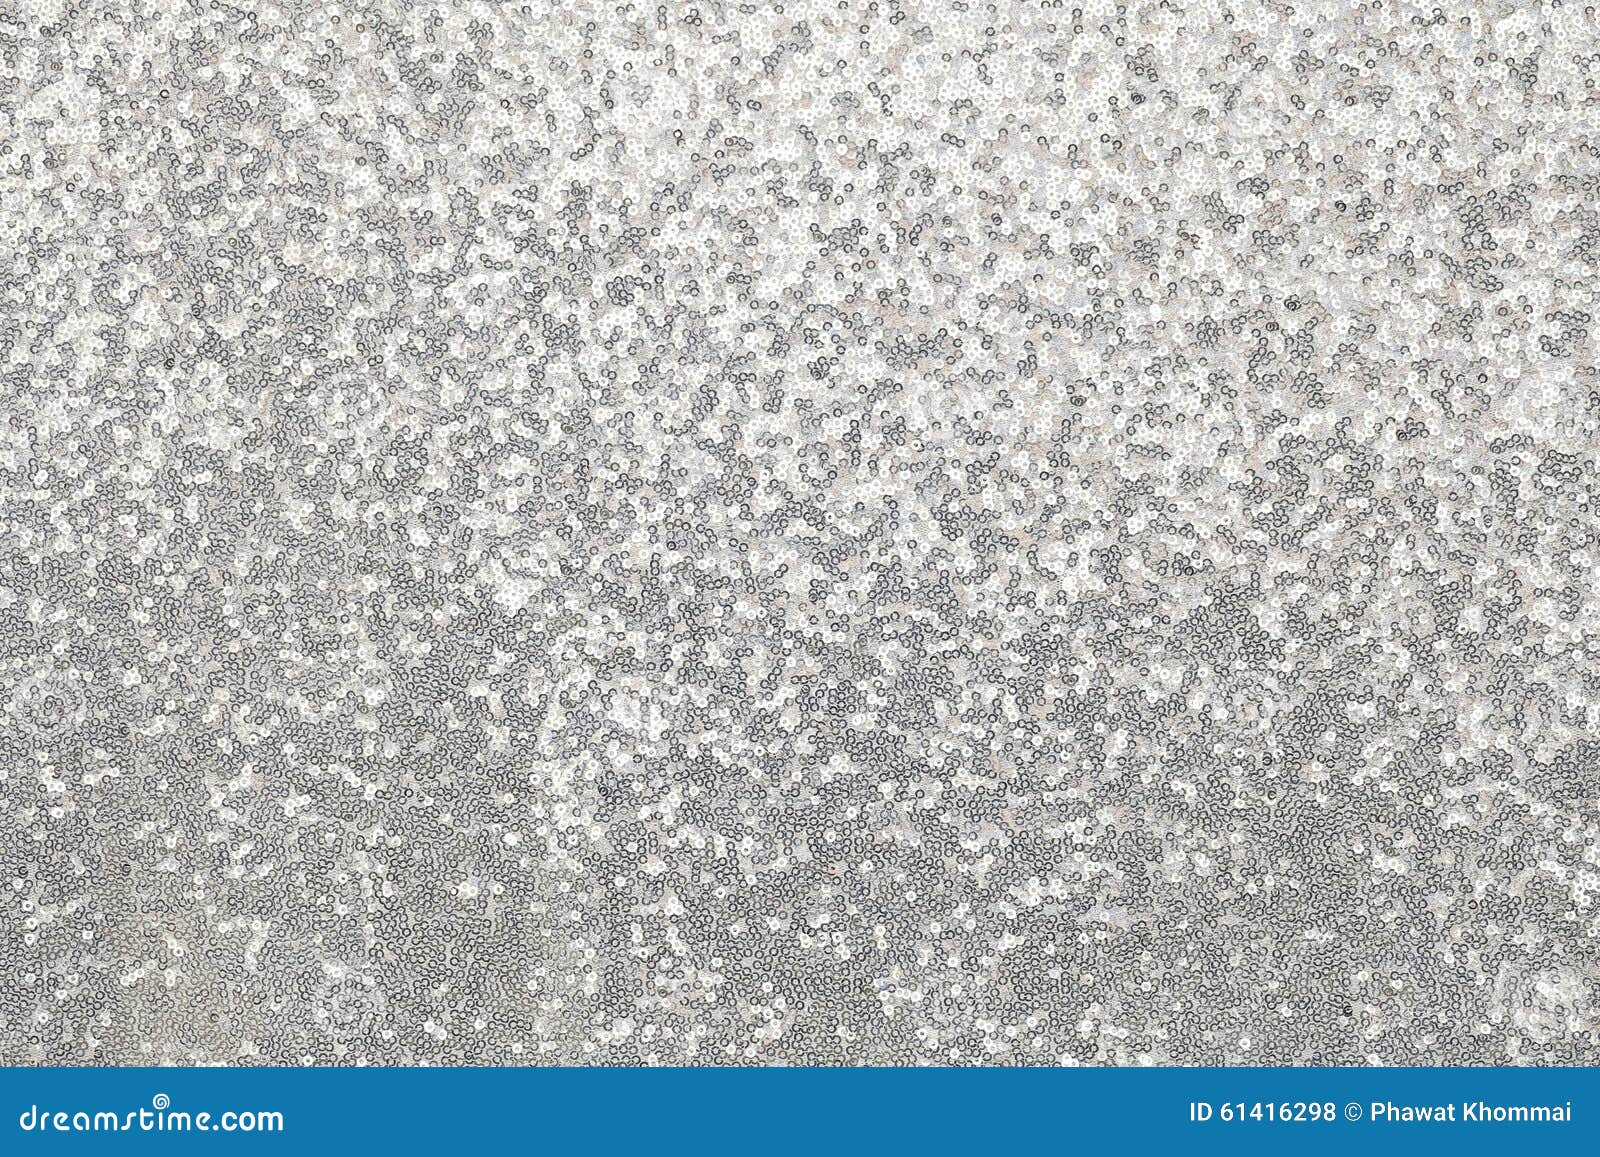 https://thumbs.dreamstime.com/z/silver-sequined-fabric-background-texture-material-61416298.jpg